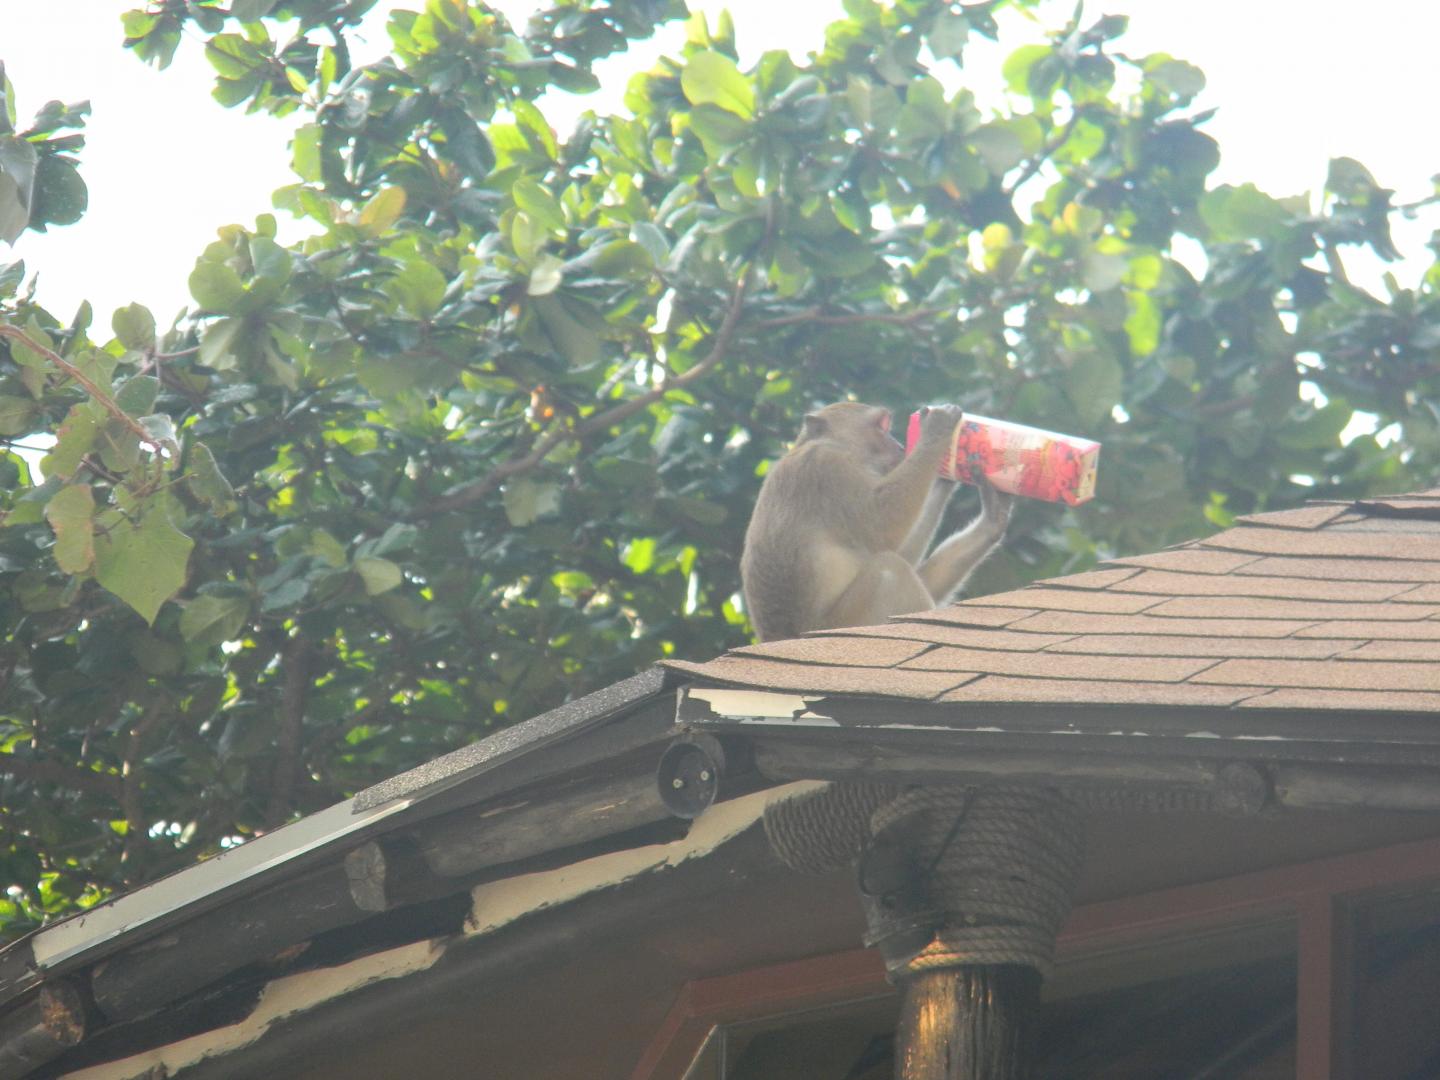 Macaque Drinking from Carton